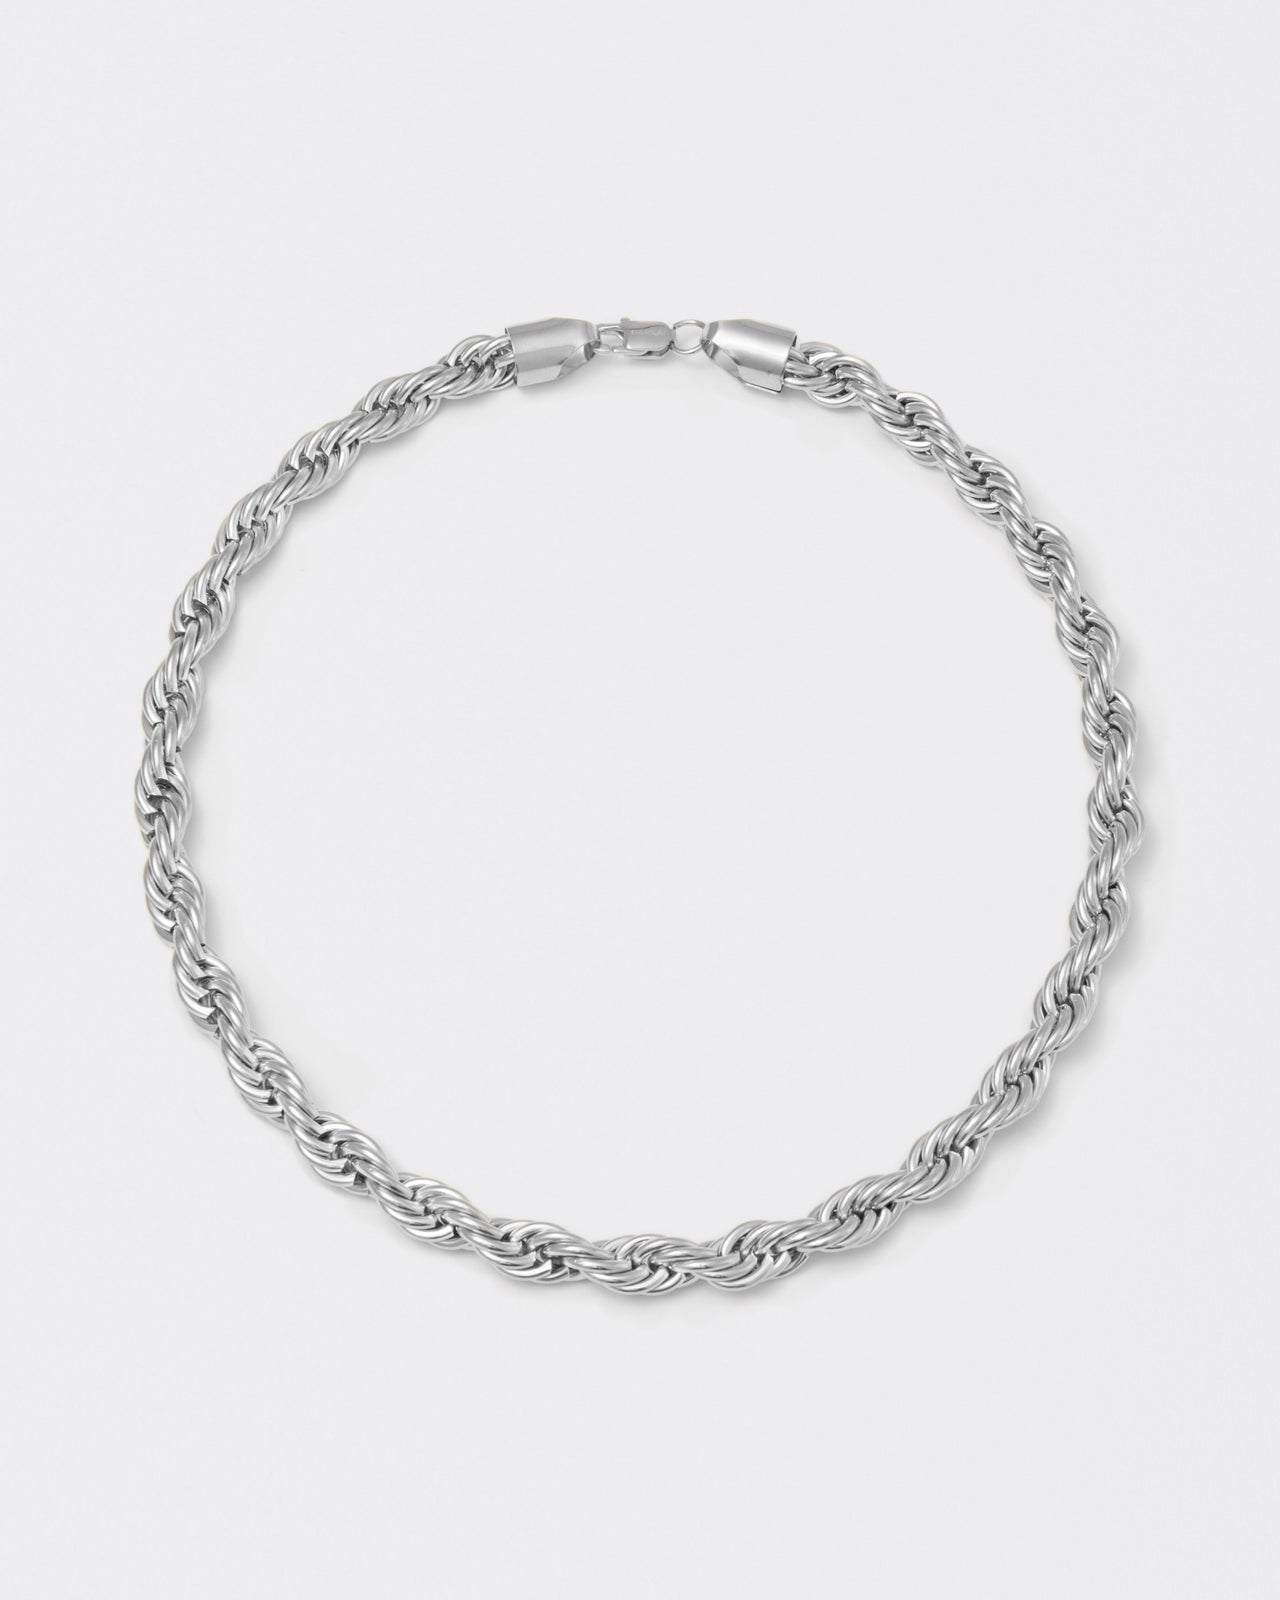 18k white gold coated 90s-inspired rope chain necklace with lasered logo regular lobster clasp.